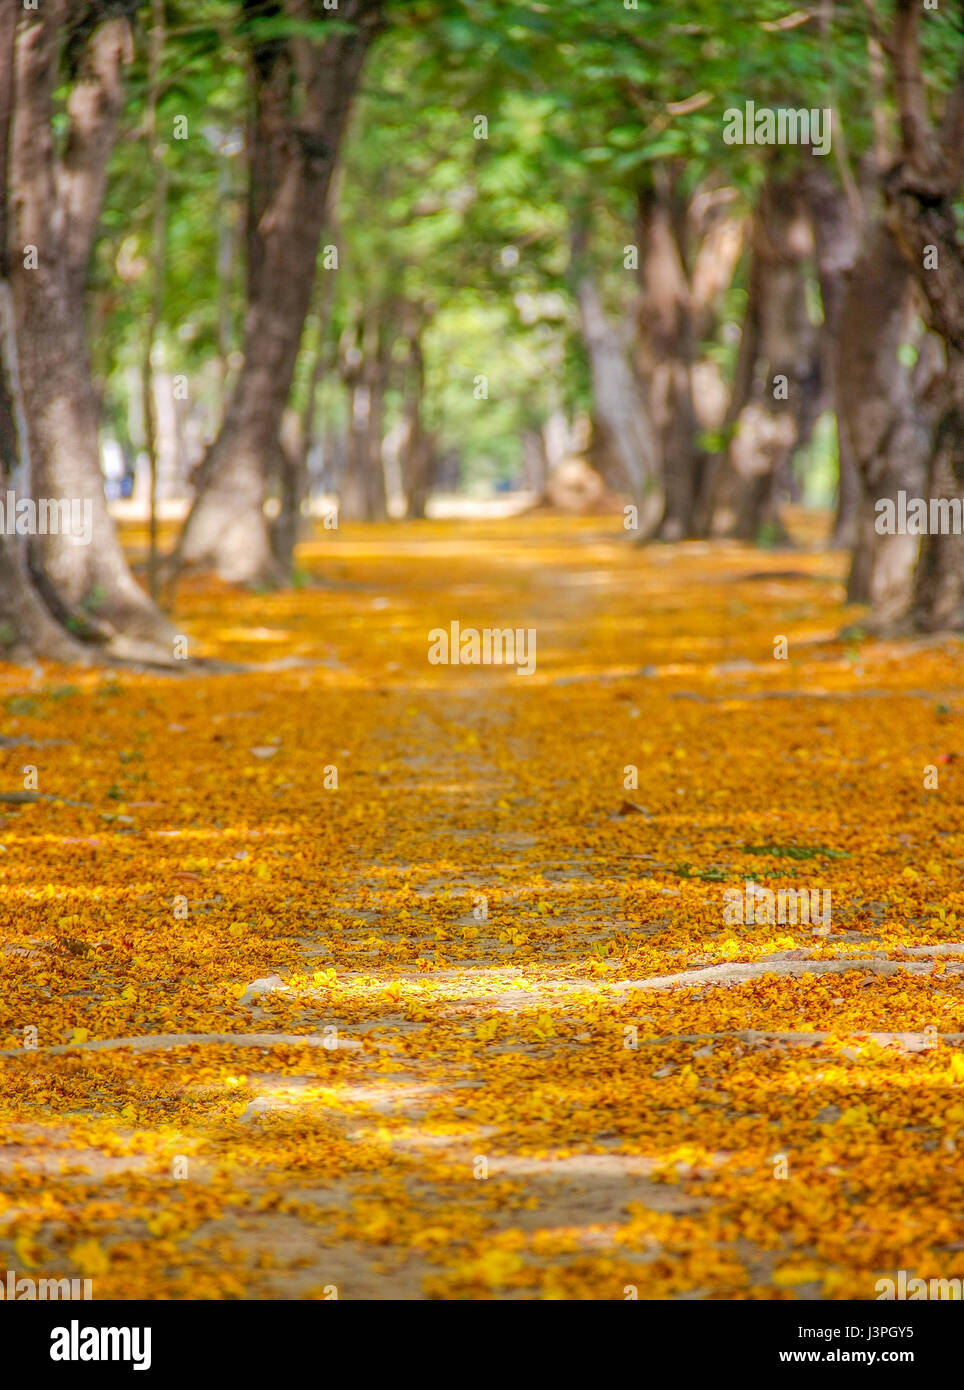 pathway with yellow flowers and green trees inside Stock Photo